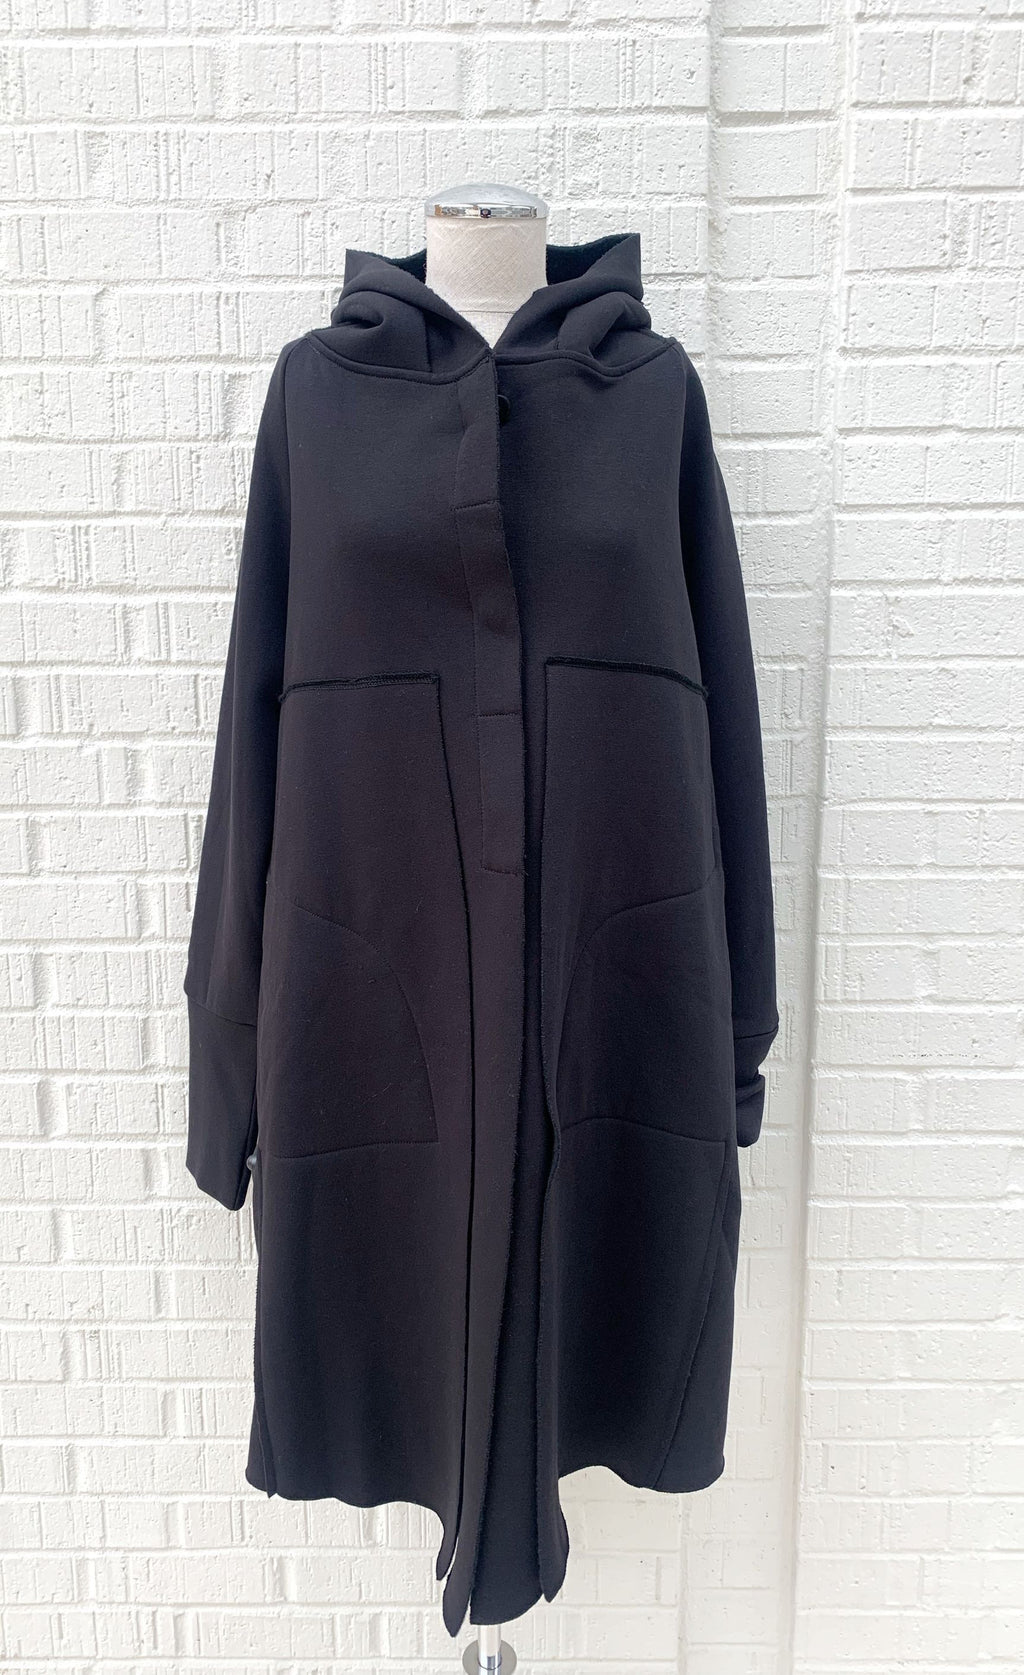 Front view of the black lotus eaters juniper coat on a mannequin. This coat has decorative stitching, long sleeves, and a closed front. The coat is knee length.